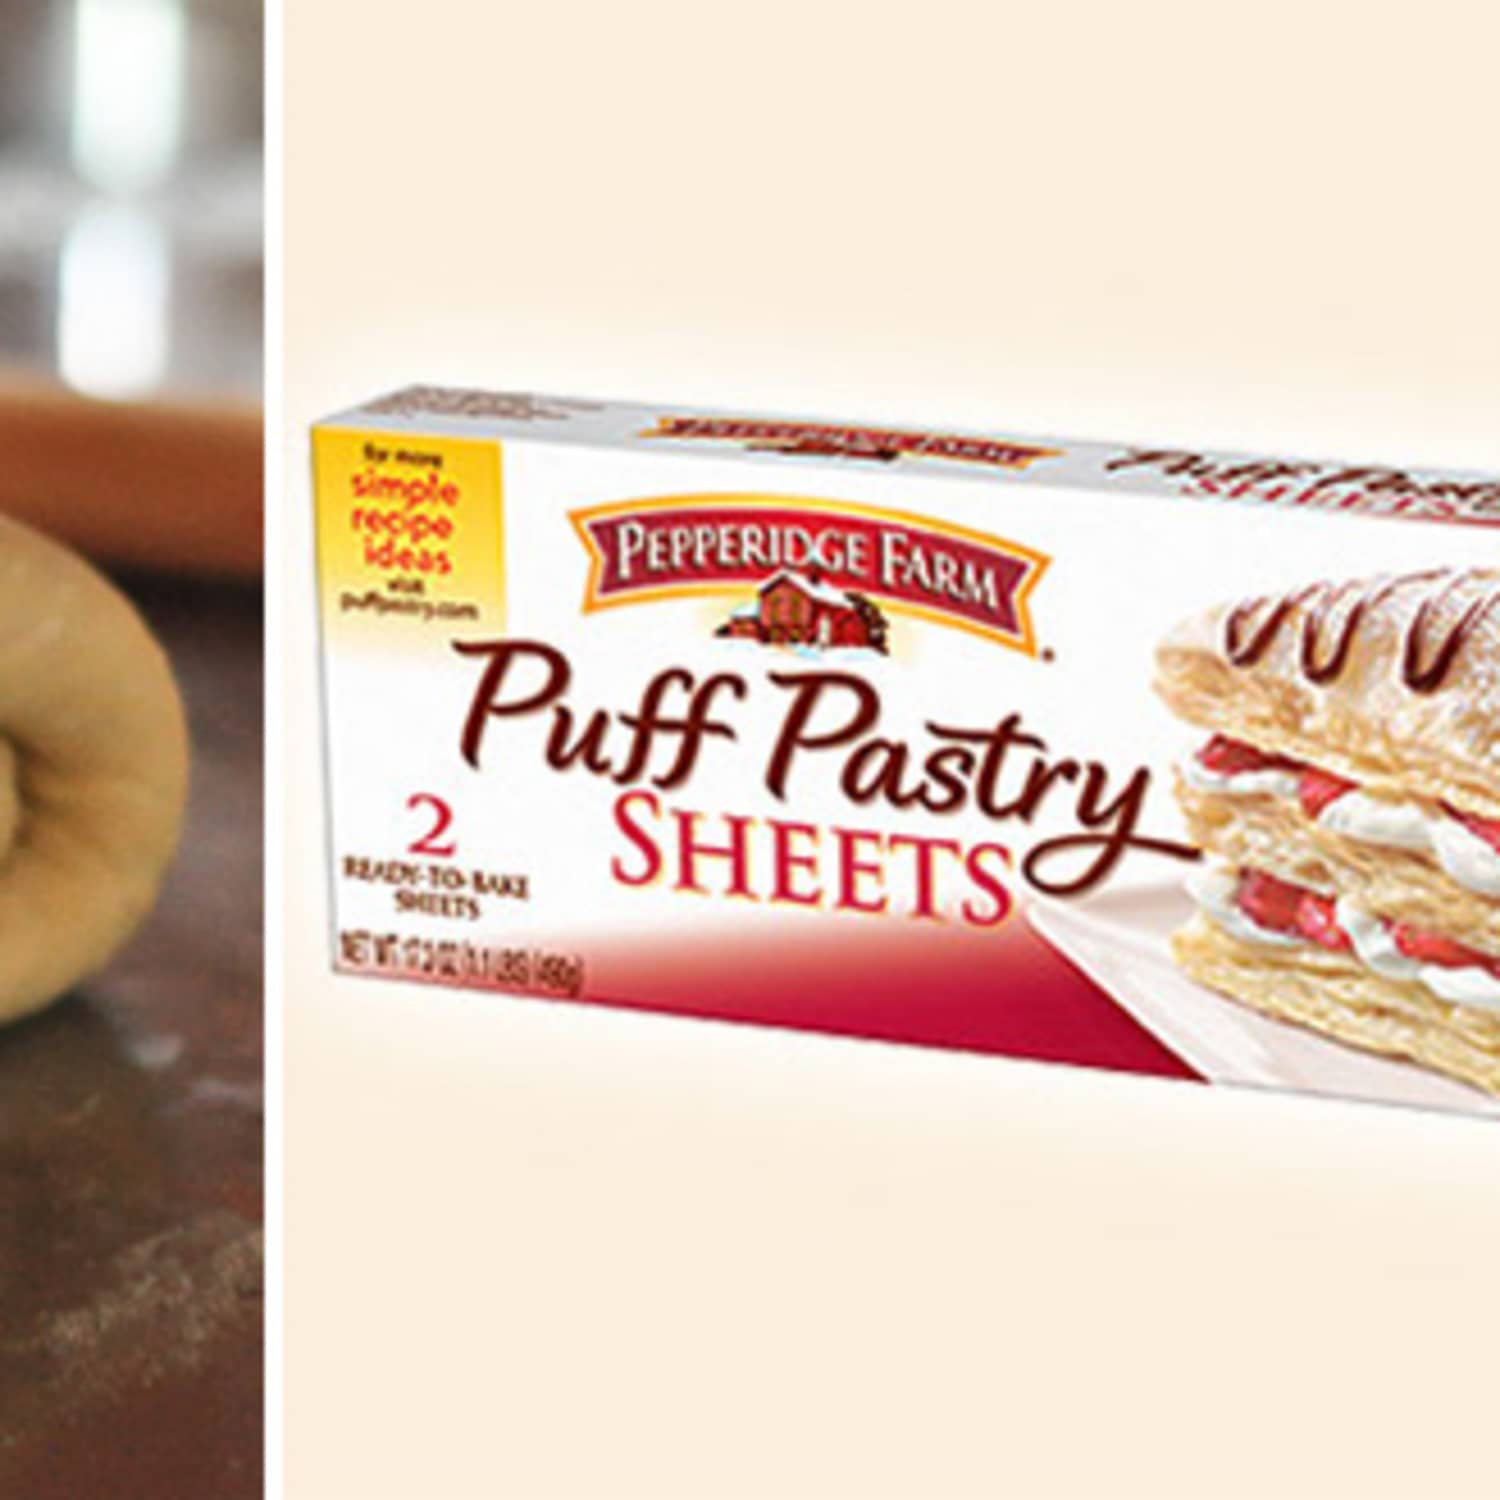 Order Pepperidge Farm Puff Pastry Sheets